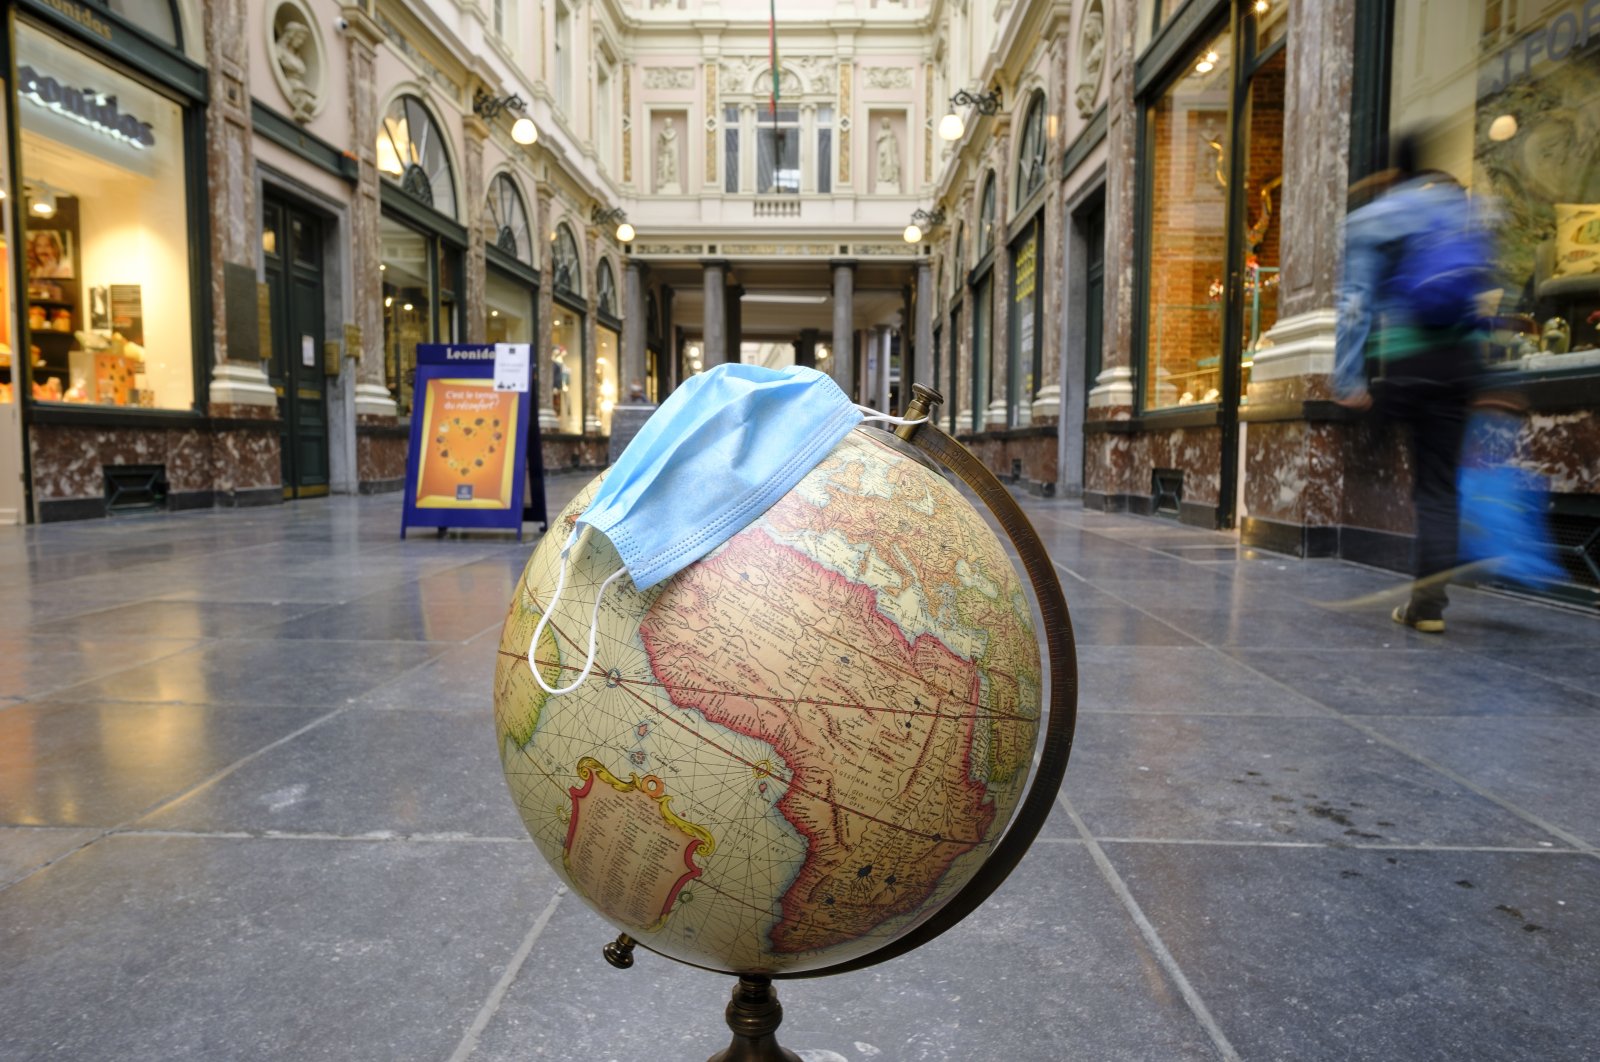 A globe with a surgical mask is seen on the floor of the Galeries Royales Saint-Hubert, Brussels, Belgium, Oct. 28, 2020. (Photo by Getty Images)